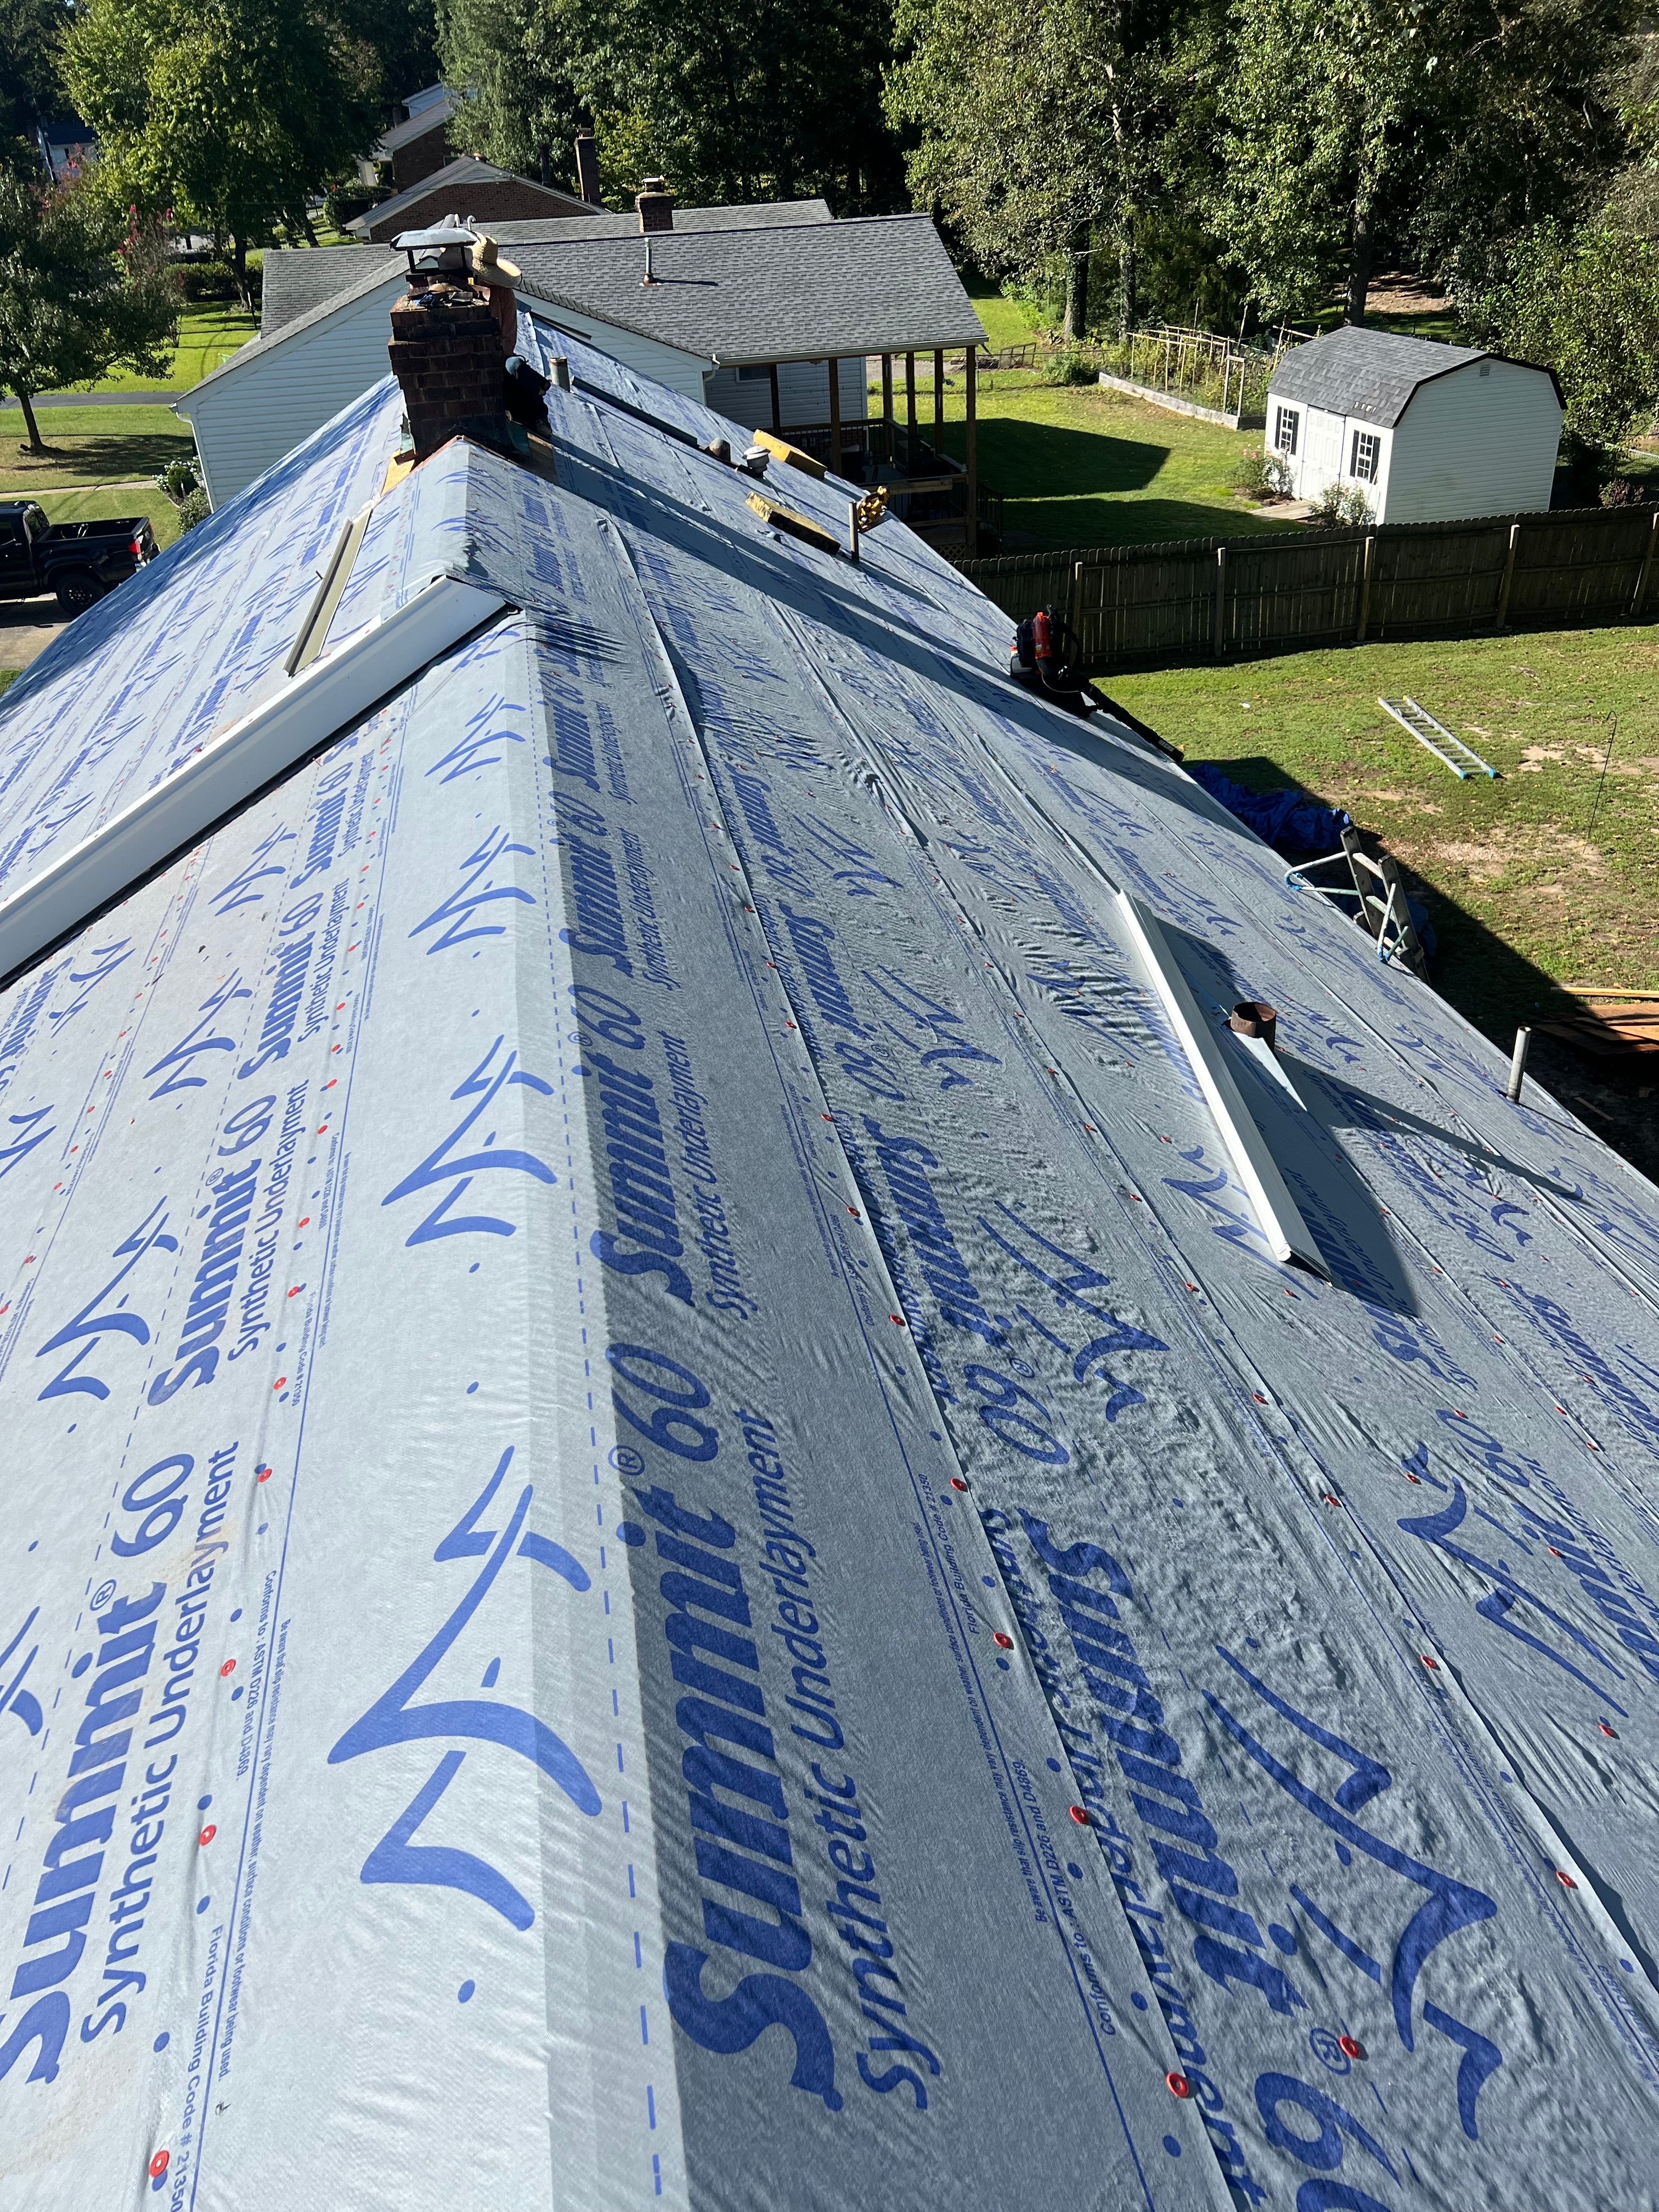 All Photos for Rise Roofing NC in Cary, NC